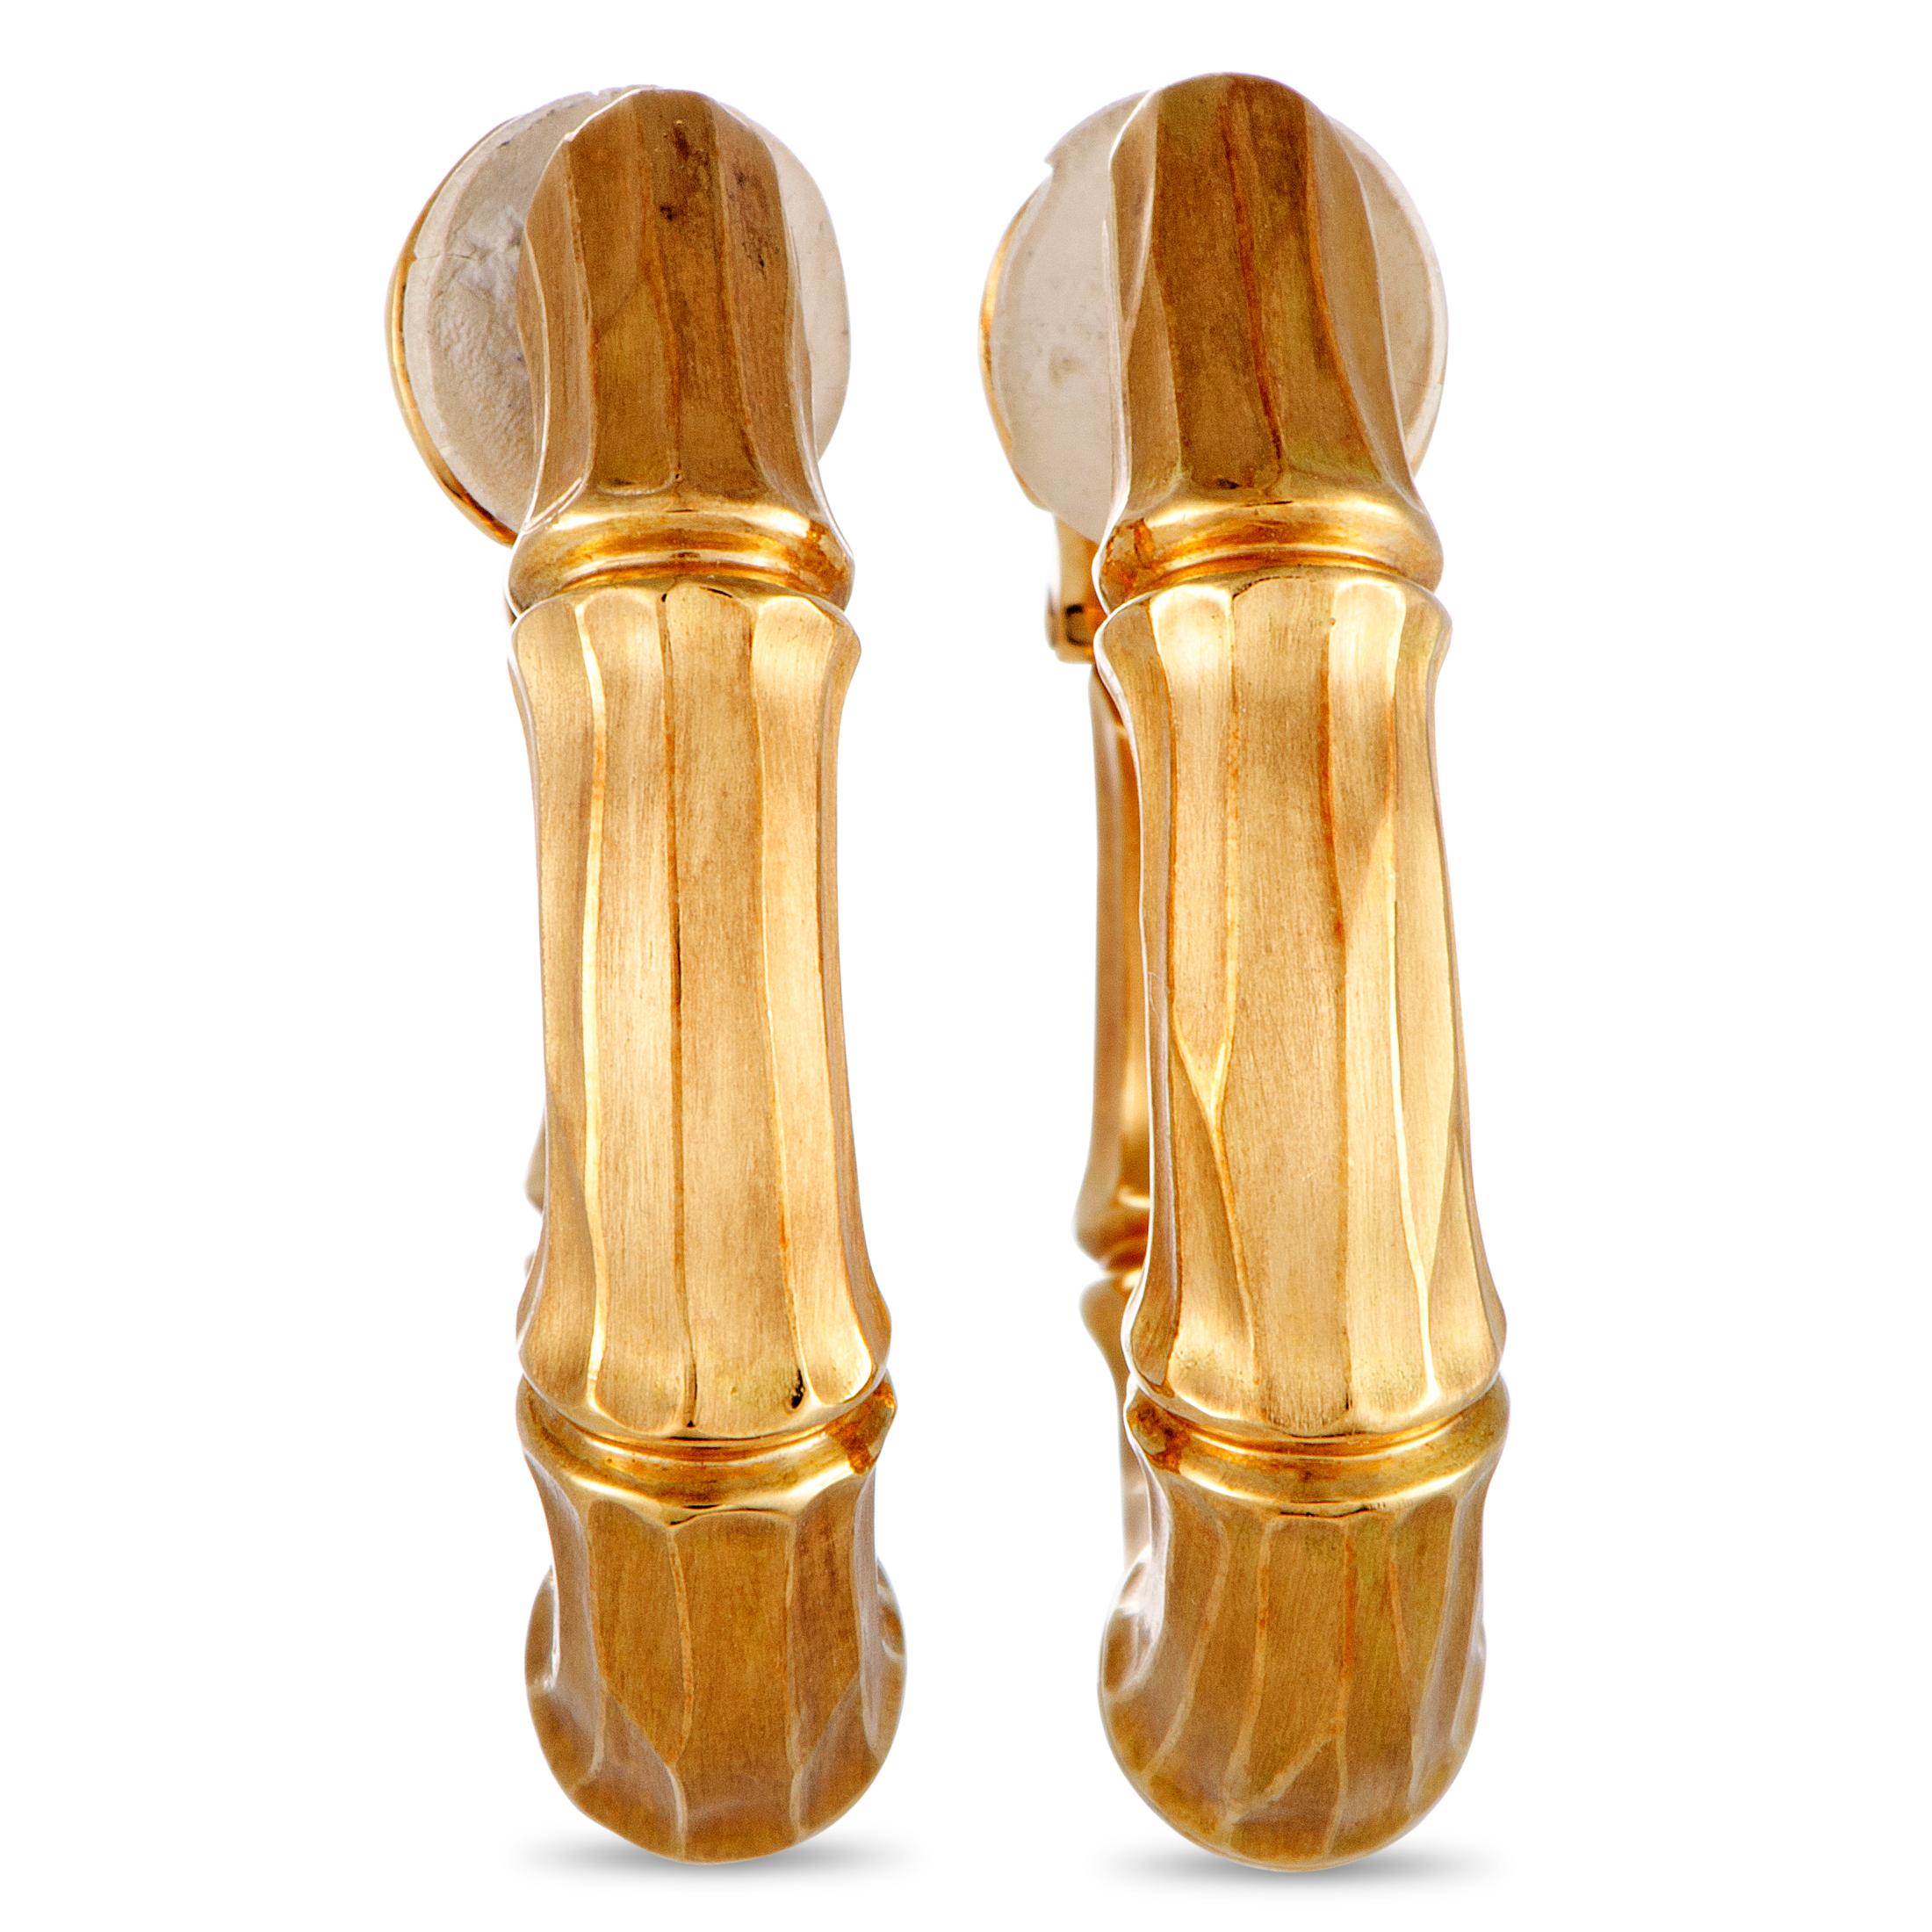 These Cartier earrings are crafted from 18K yellow gold and feature clip-on closure. Each of the two weighs 13.5 grams and they measure 1.37” in length and 0.25” in width.

The earrings are offered in estate condition and include the manufacturer’s